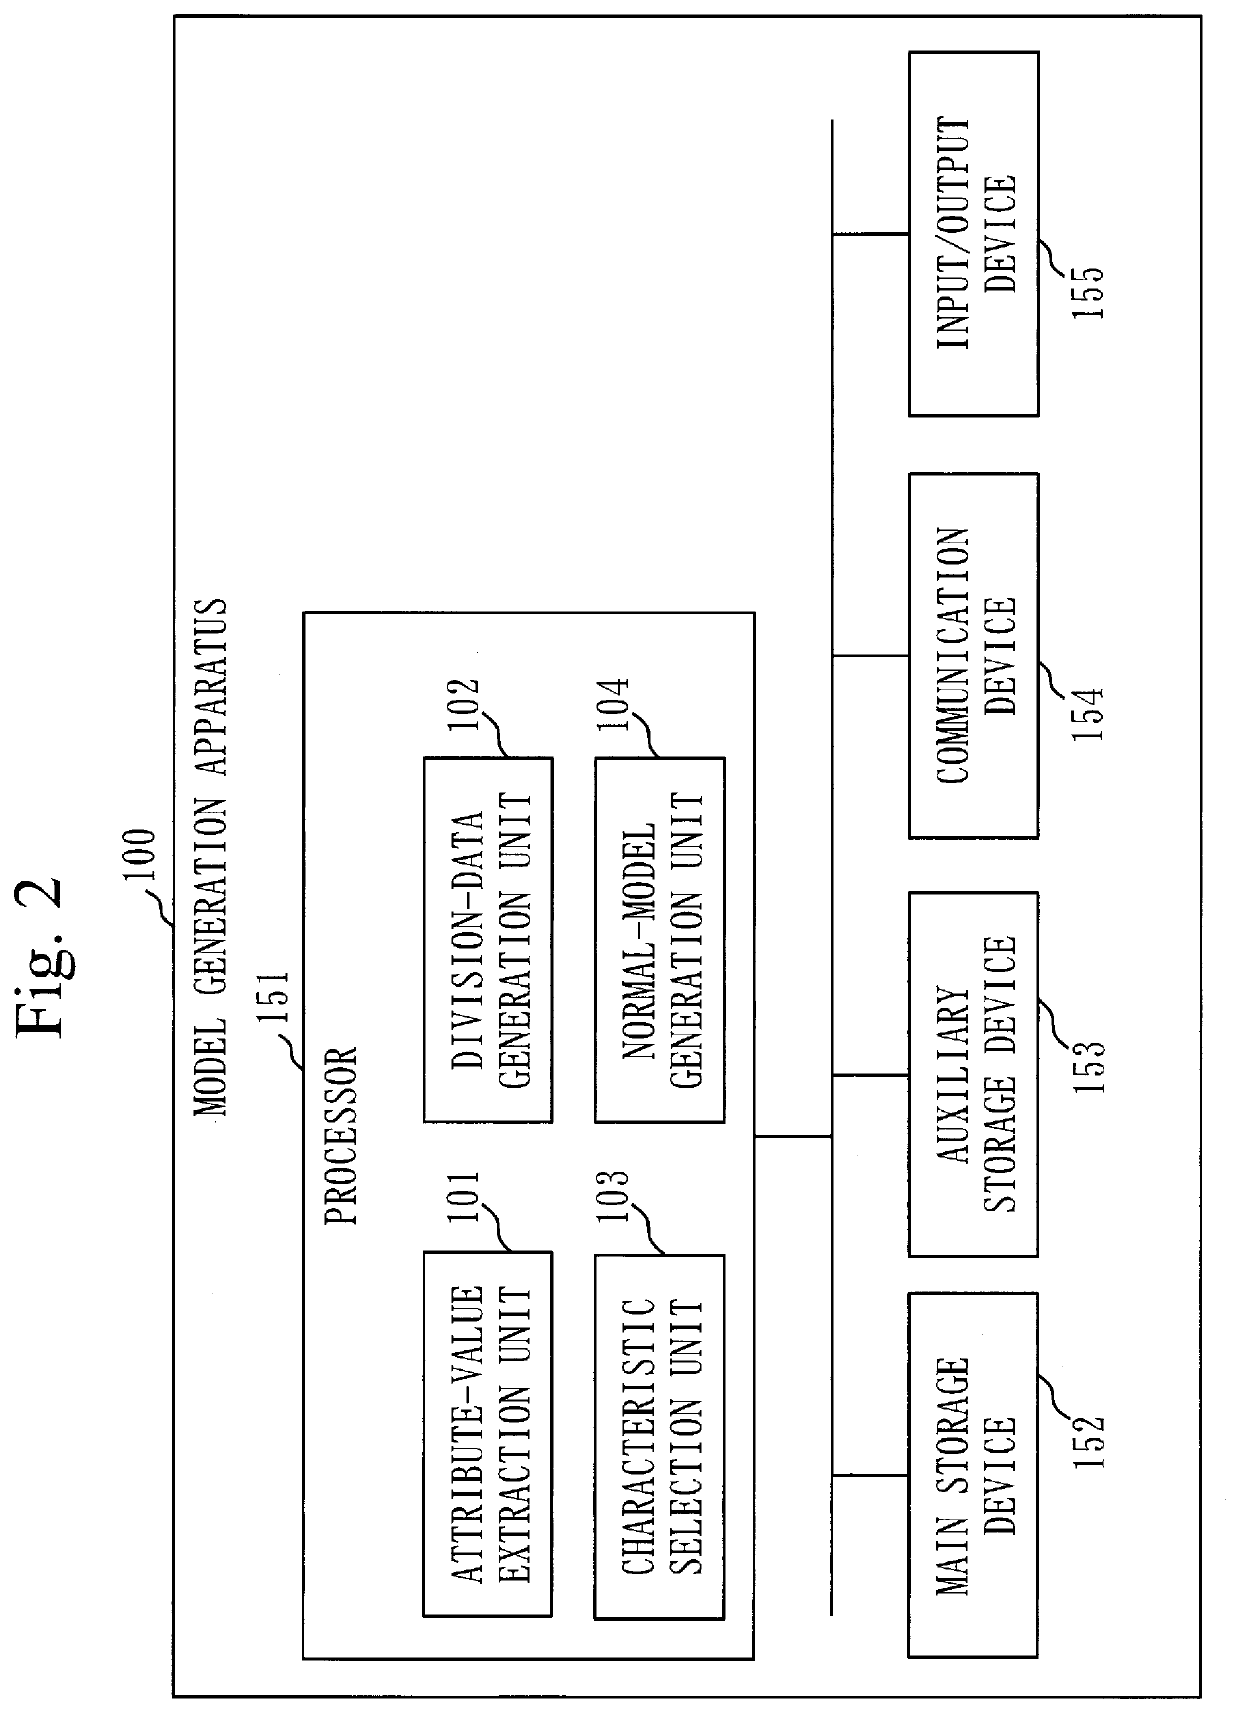 Anomaly detection apparatus, anomaly detection method, and computer readable medium